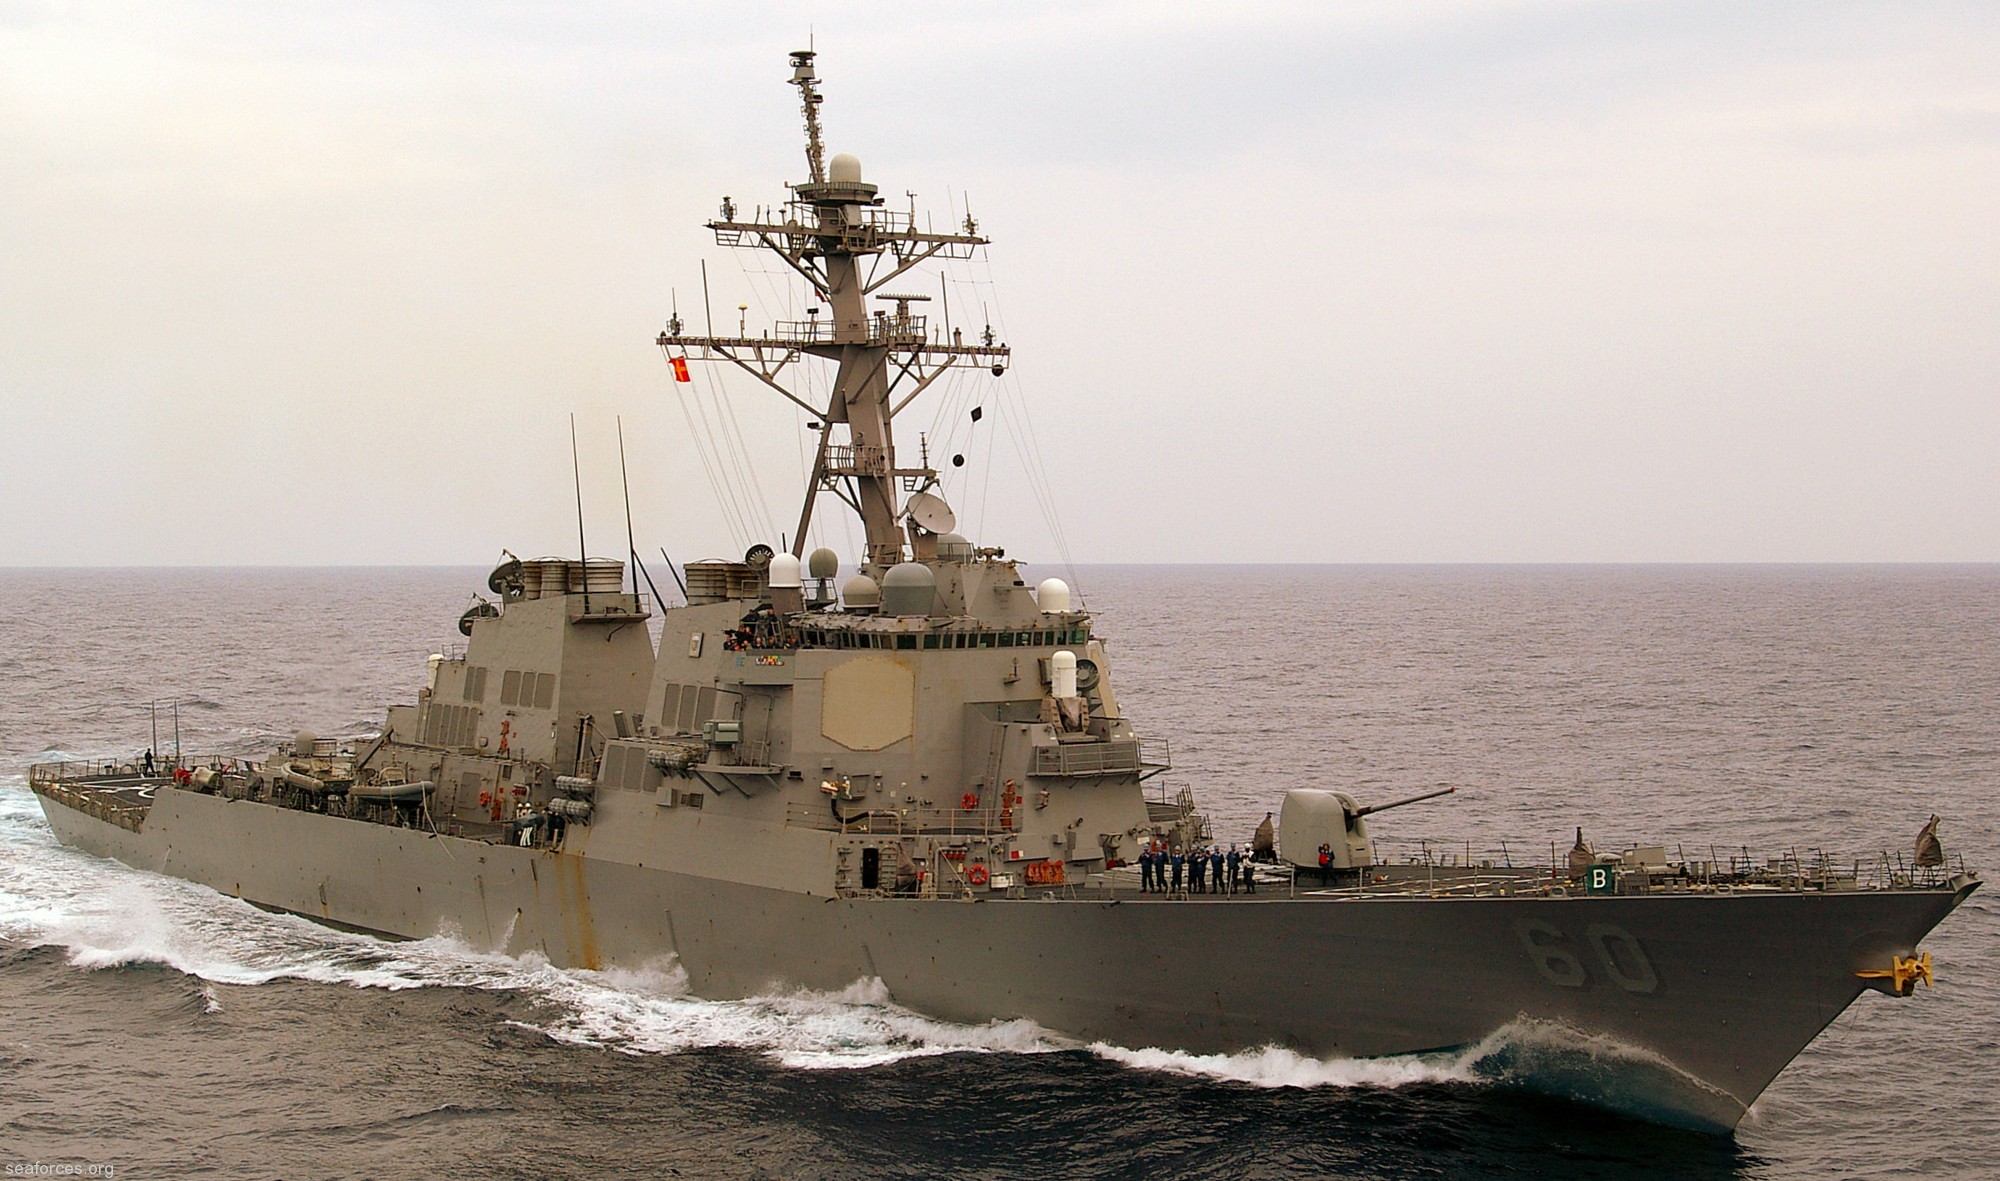 ddg-60 uss paul hamilton guided missile destroyer us navy 33